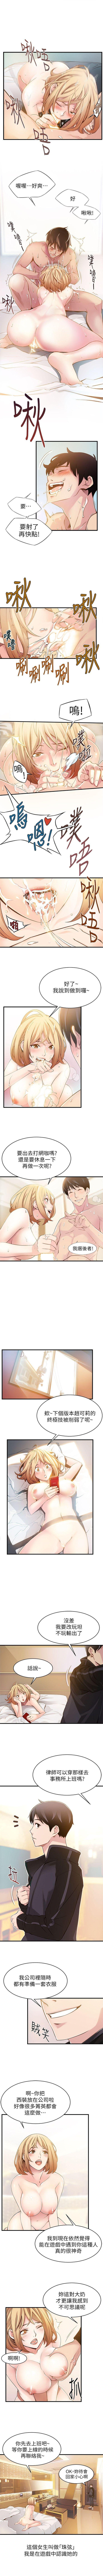 Slave 弱點 1-107 官方中文（連載中） Cheating - Page 3